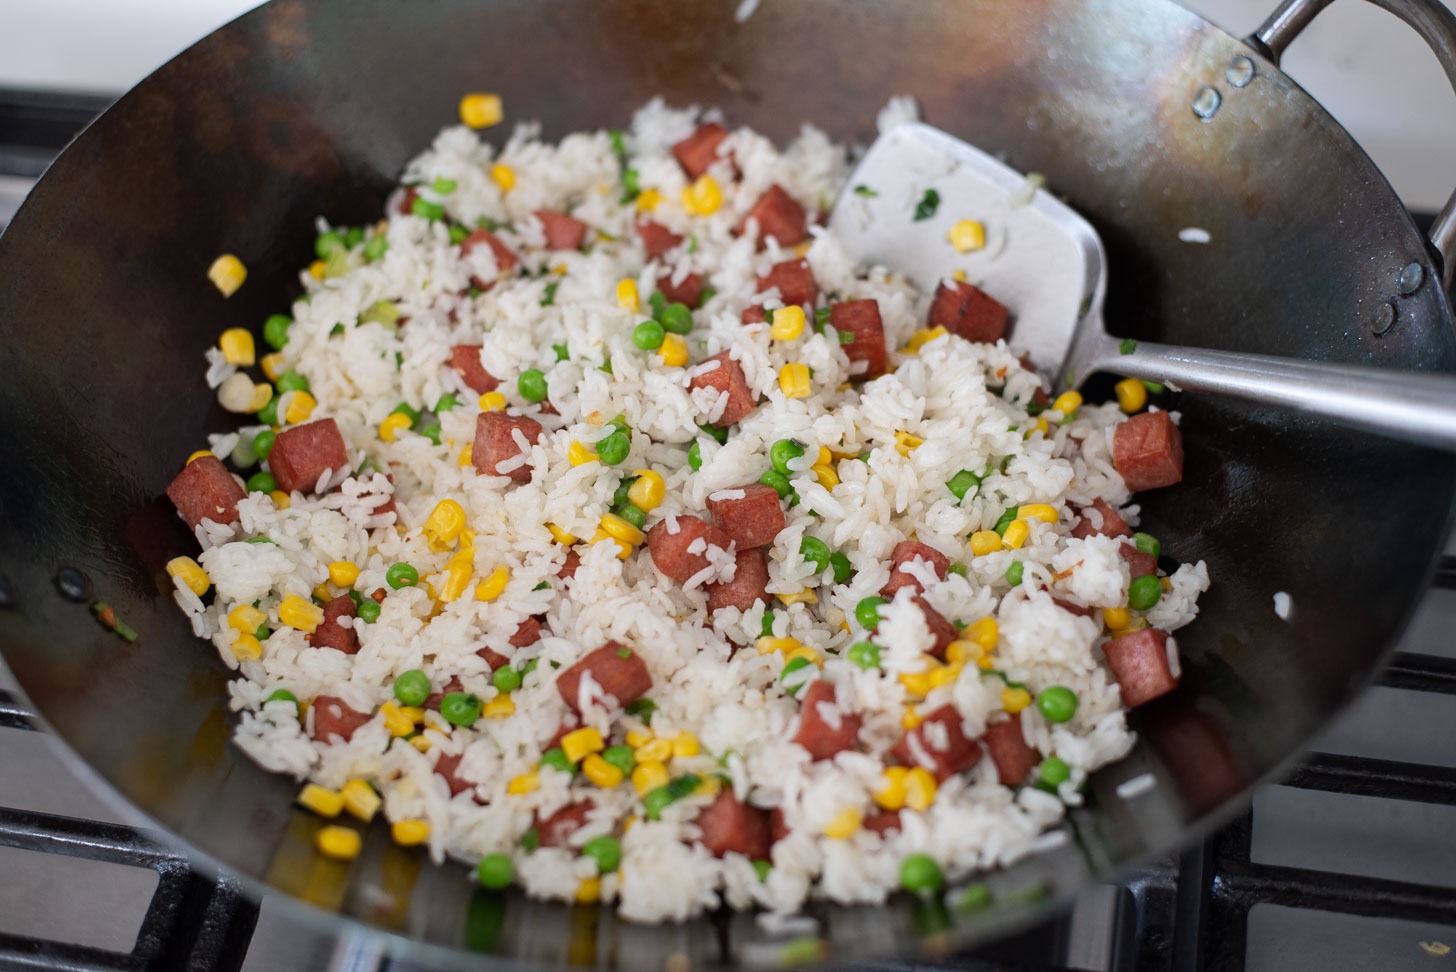 Rice is added to make Spam fried rice in a wok